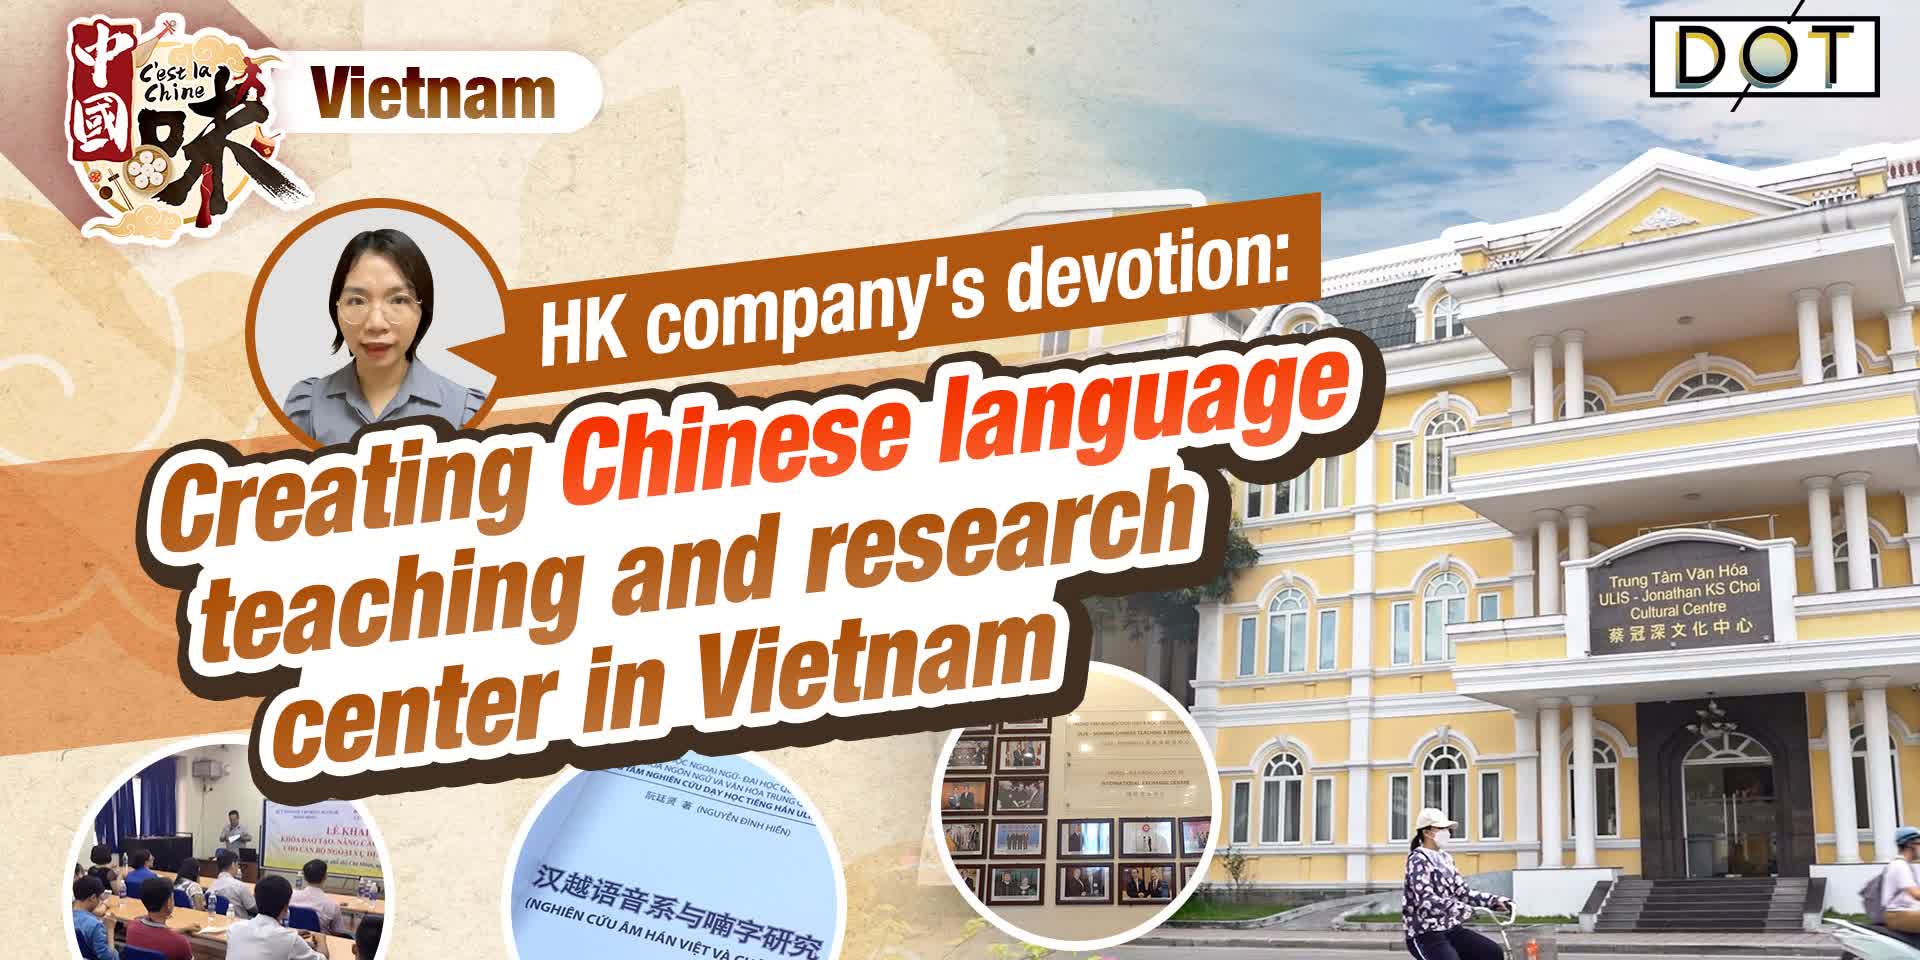 C'est la Chine · Vietnam | HK company's devotion: Creating Chinese language teaching and research center in Vietnam